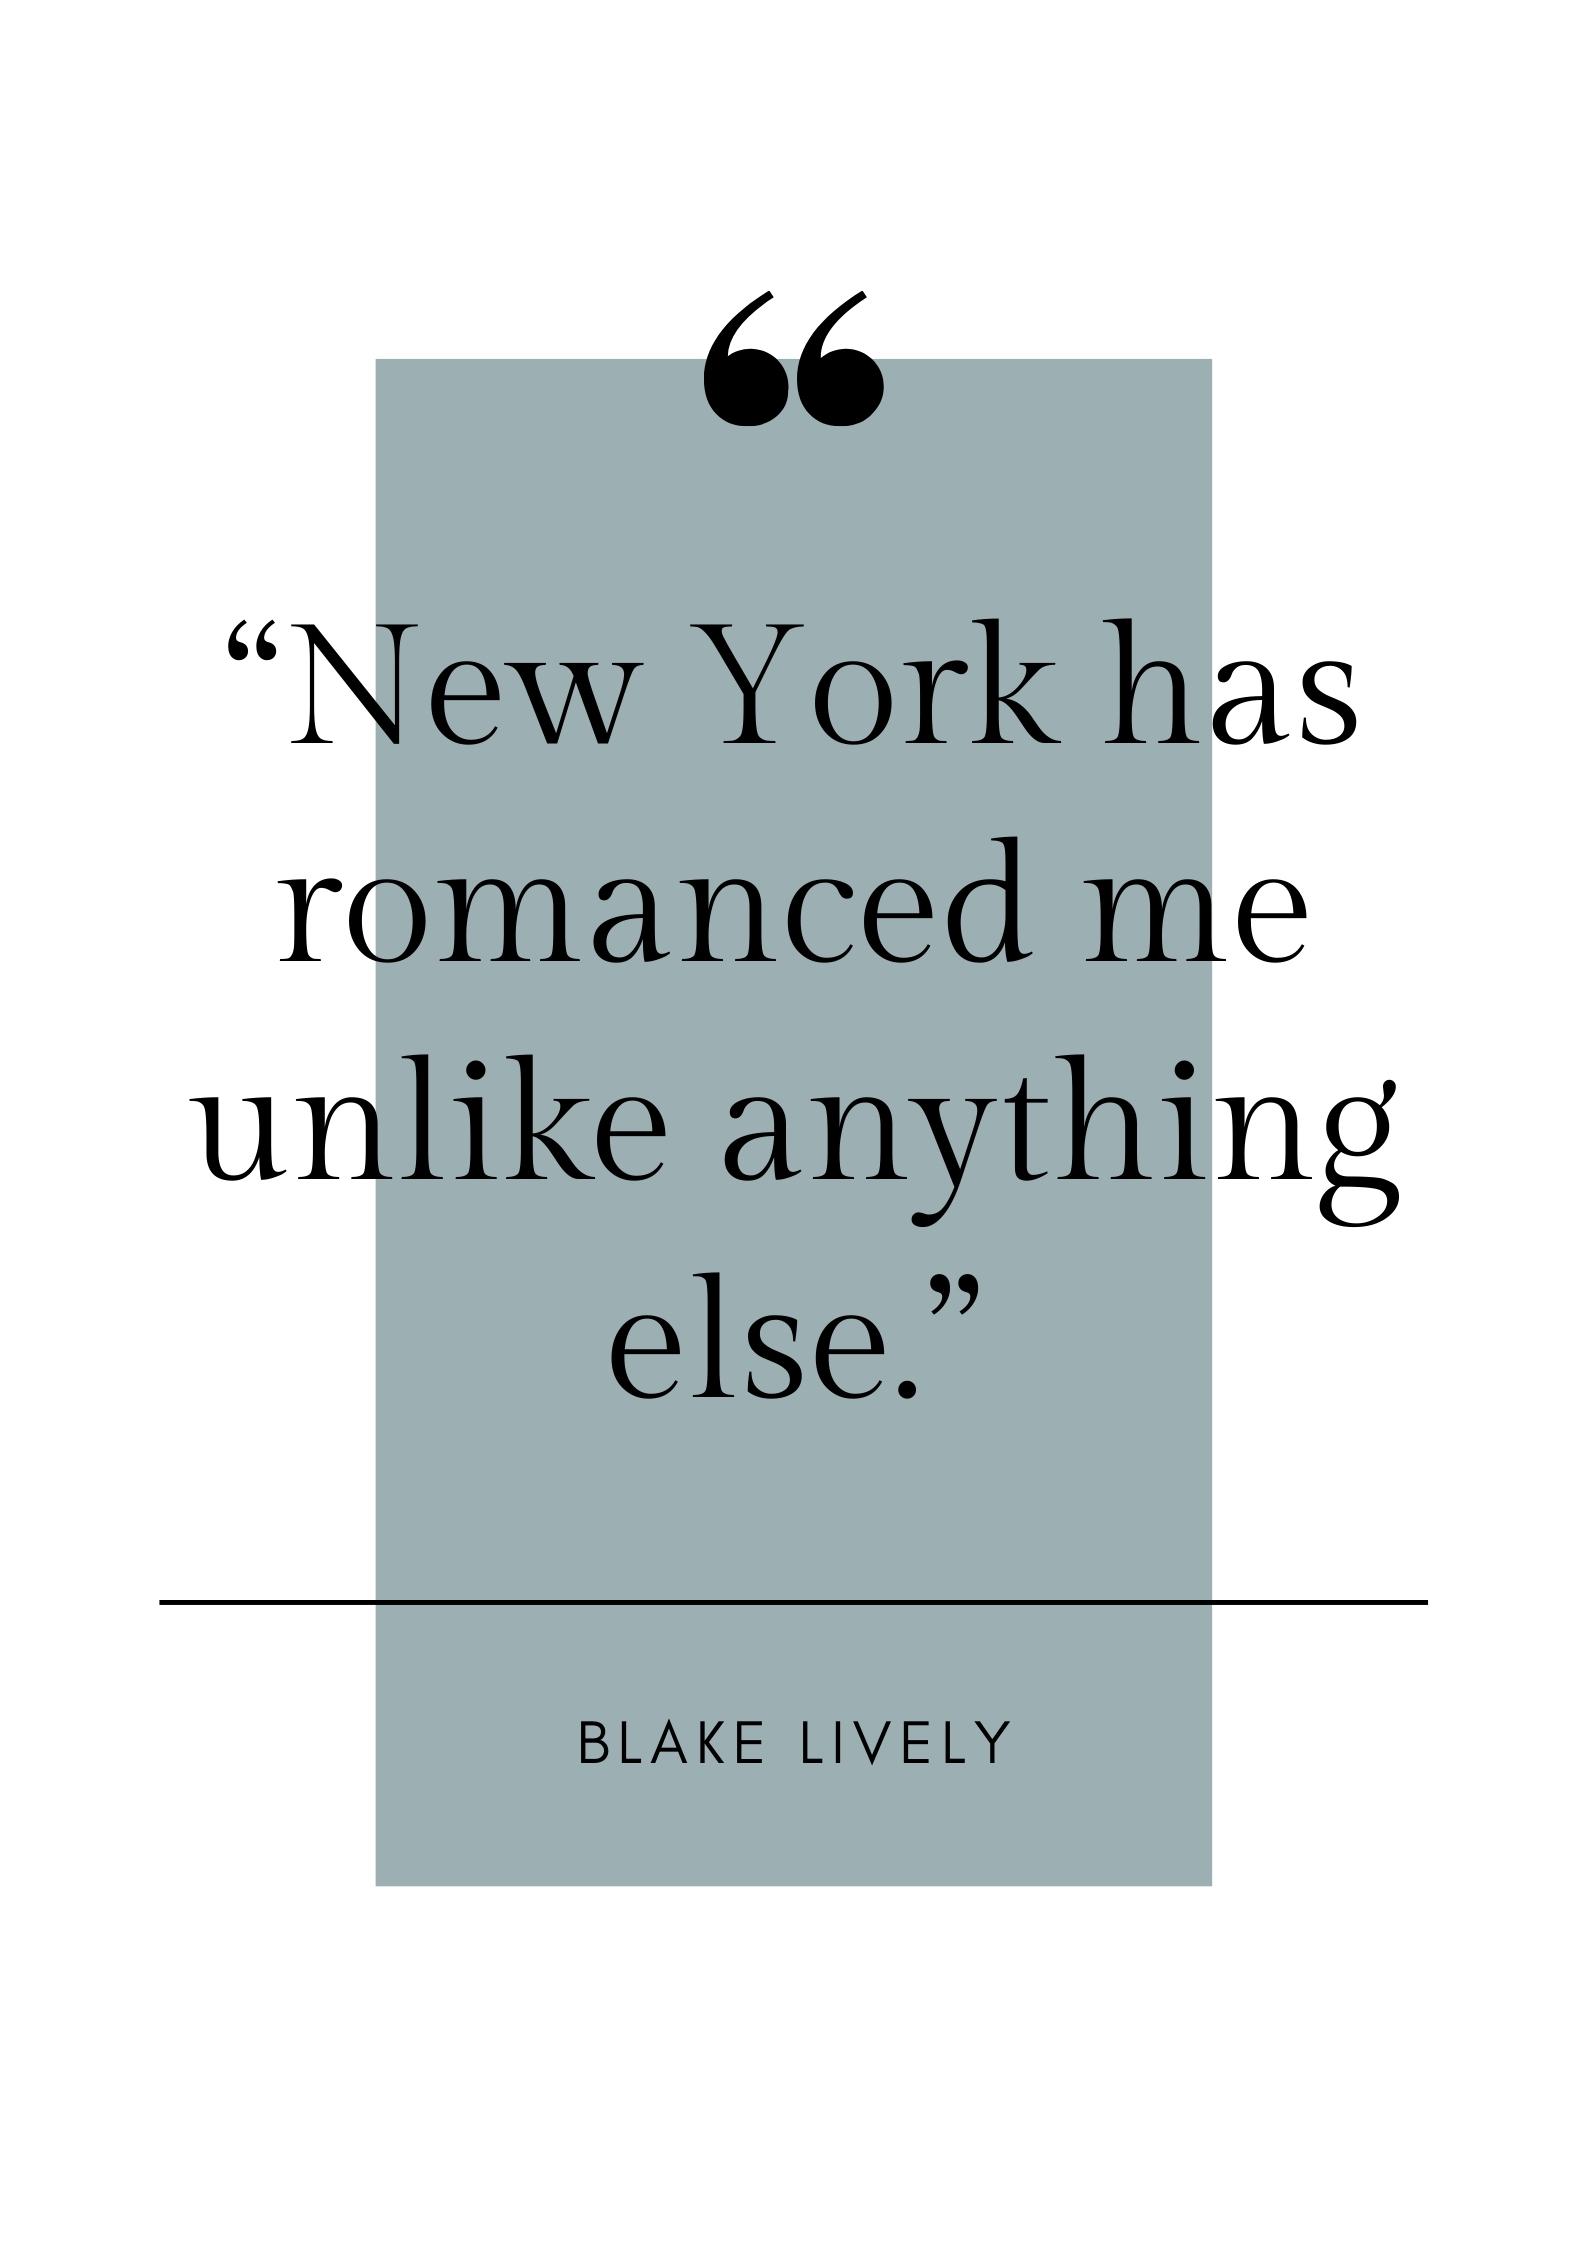 blake lively quote